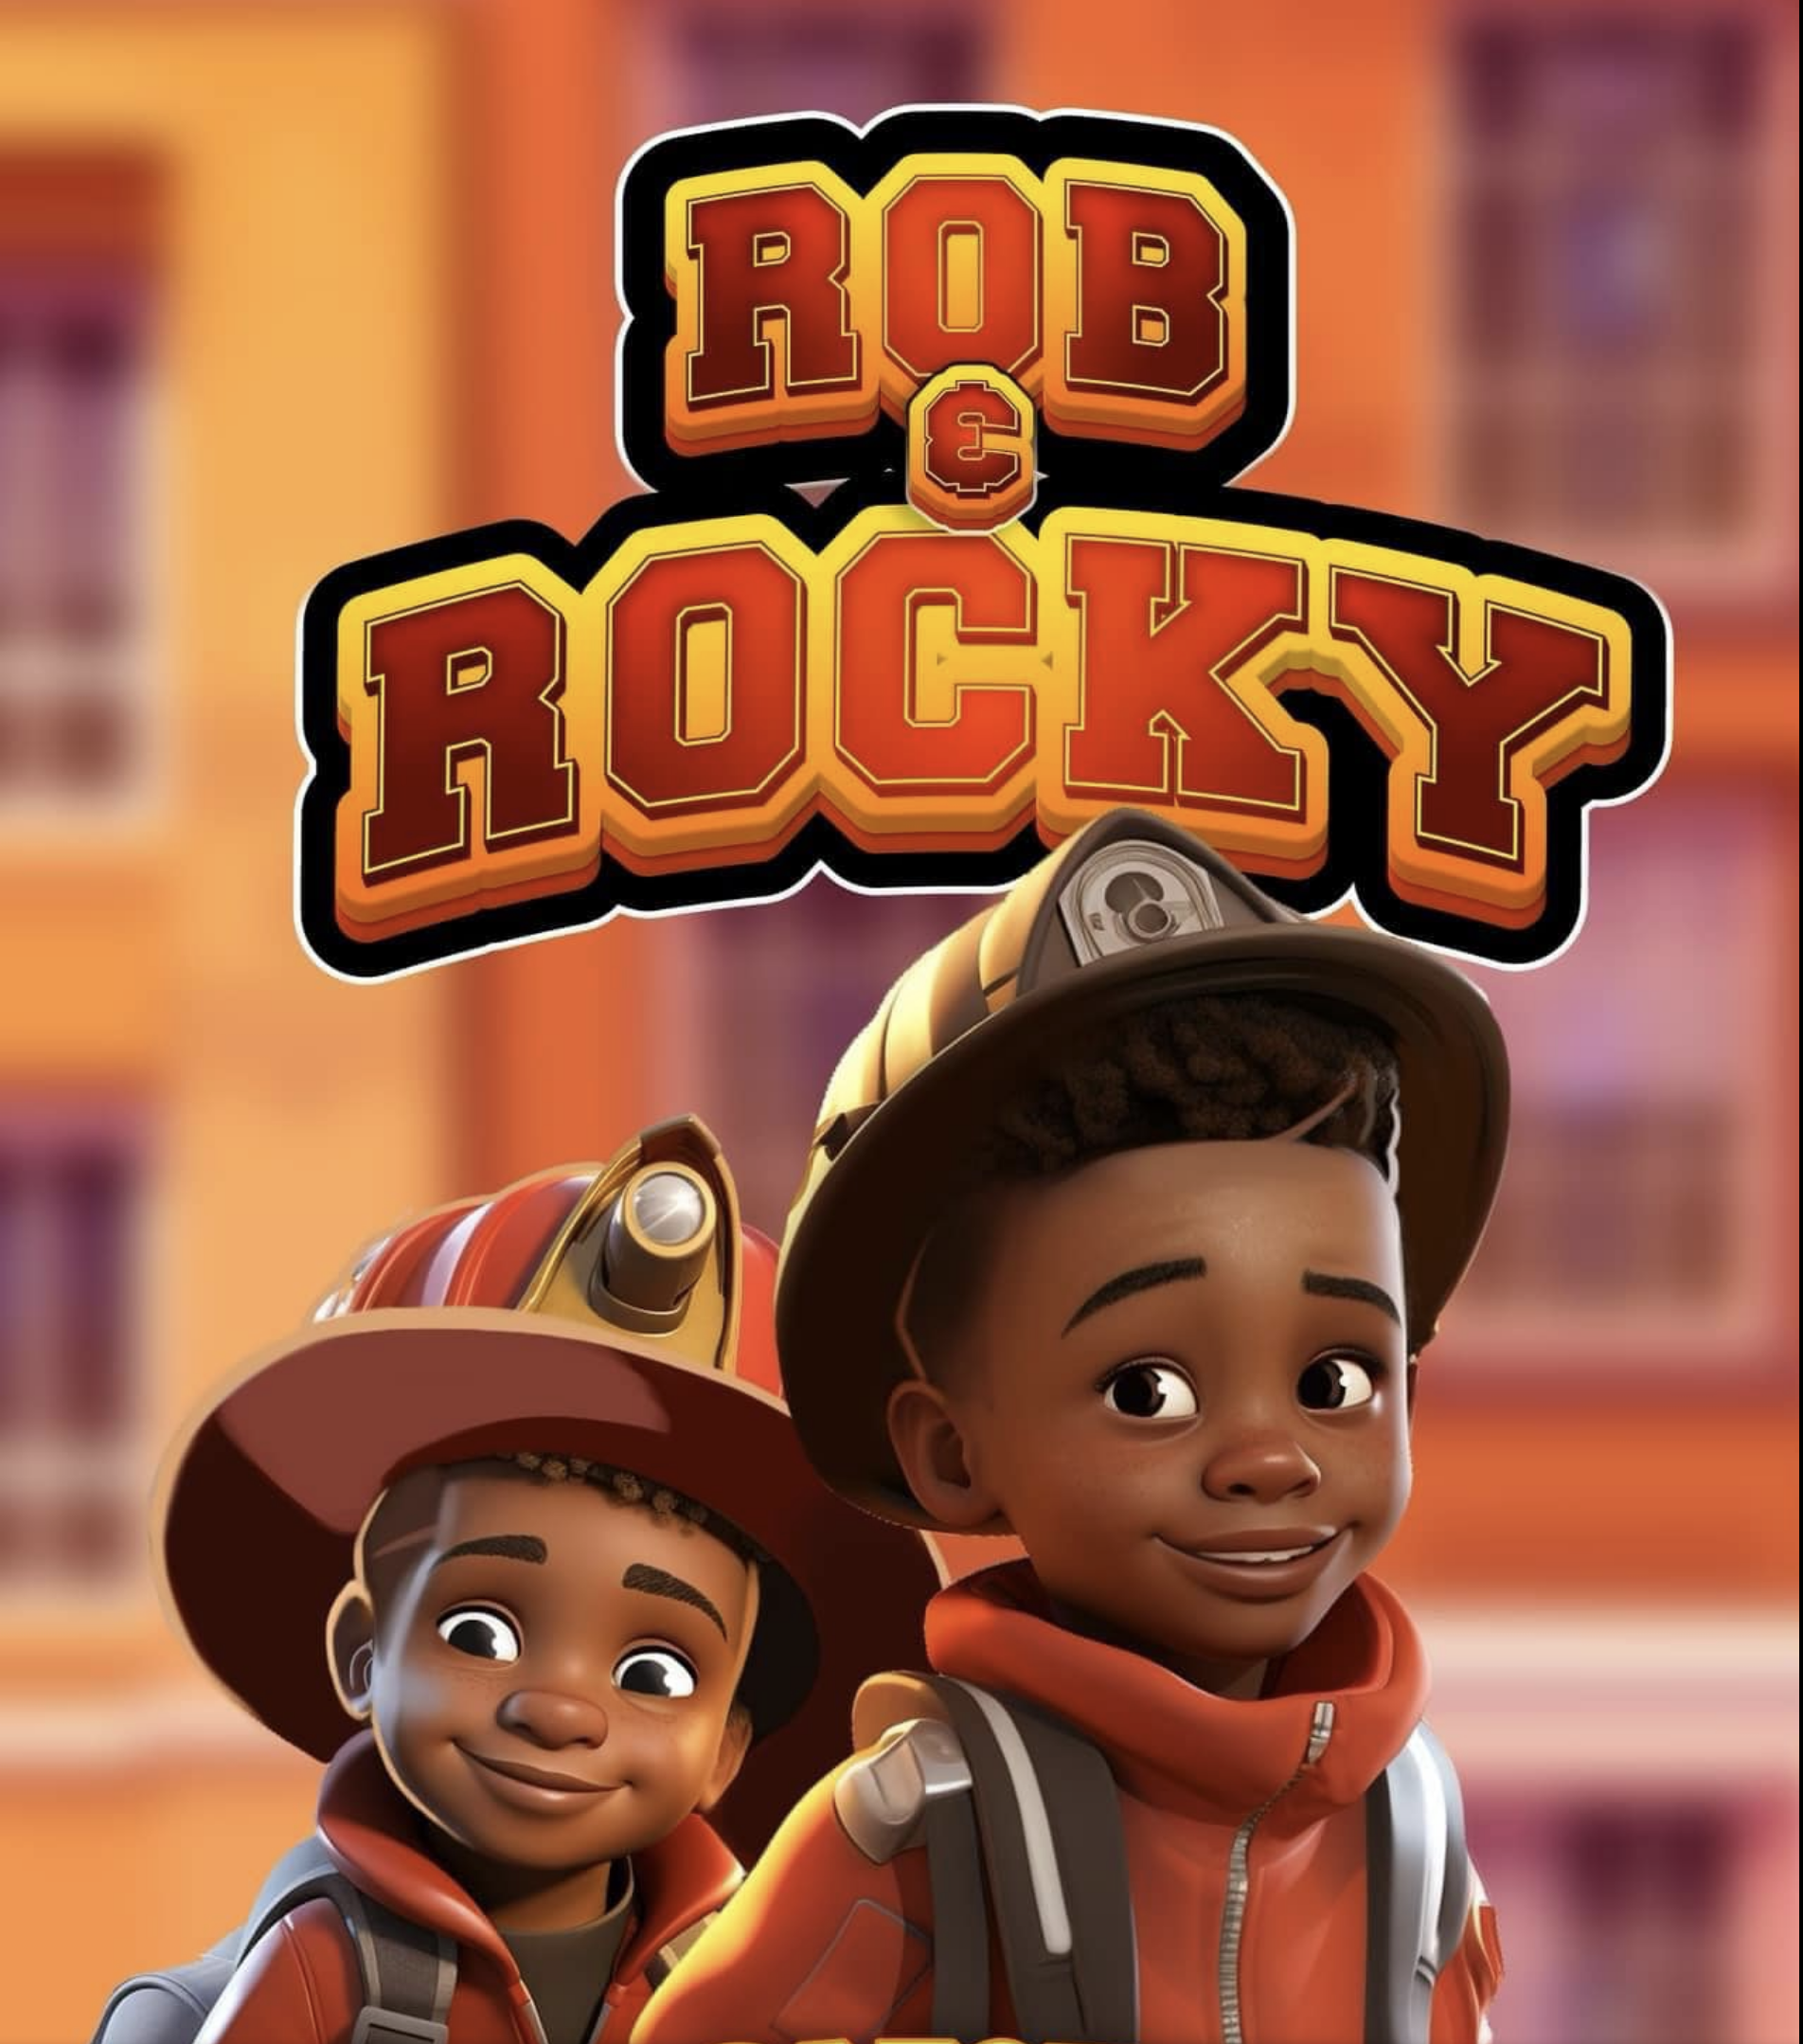 Image for Meet Author & Firefighter Bo Chaney | Douglass Branch